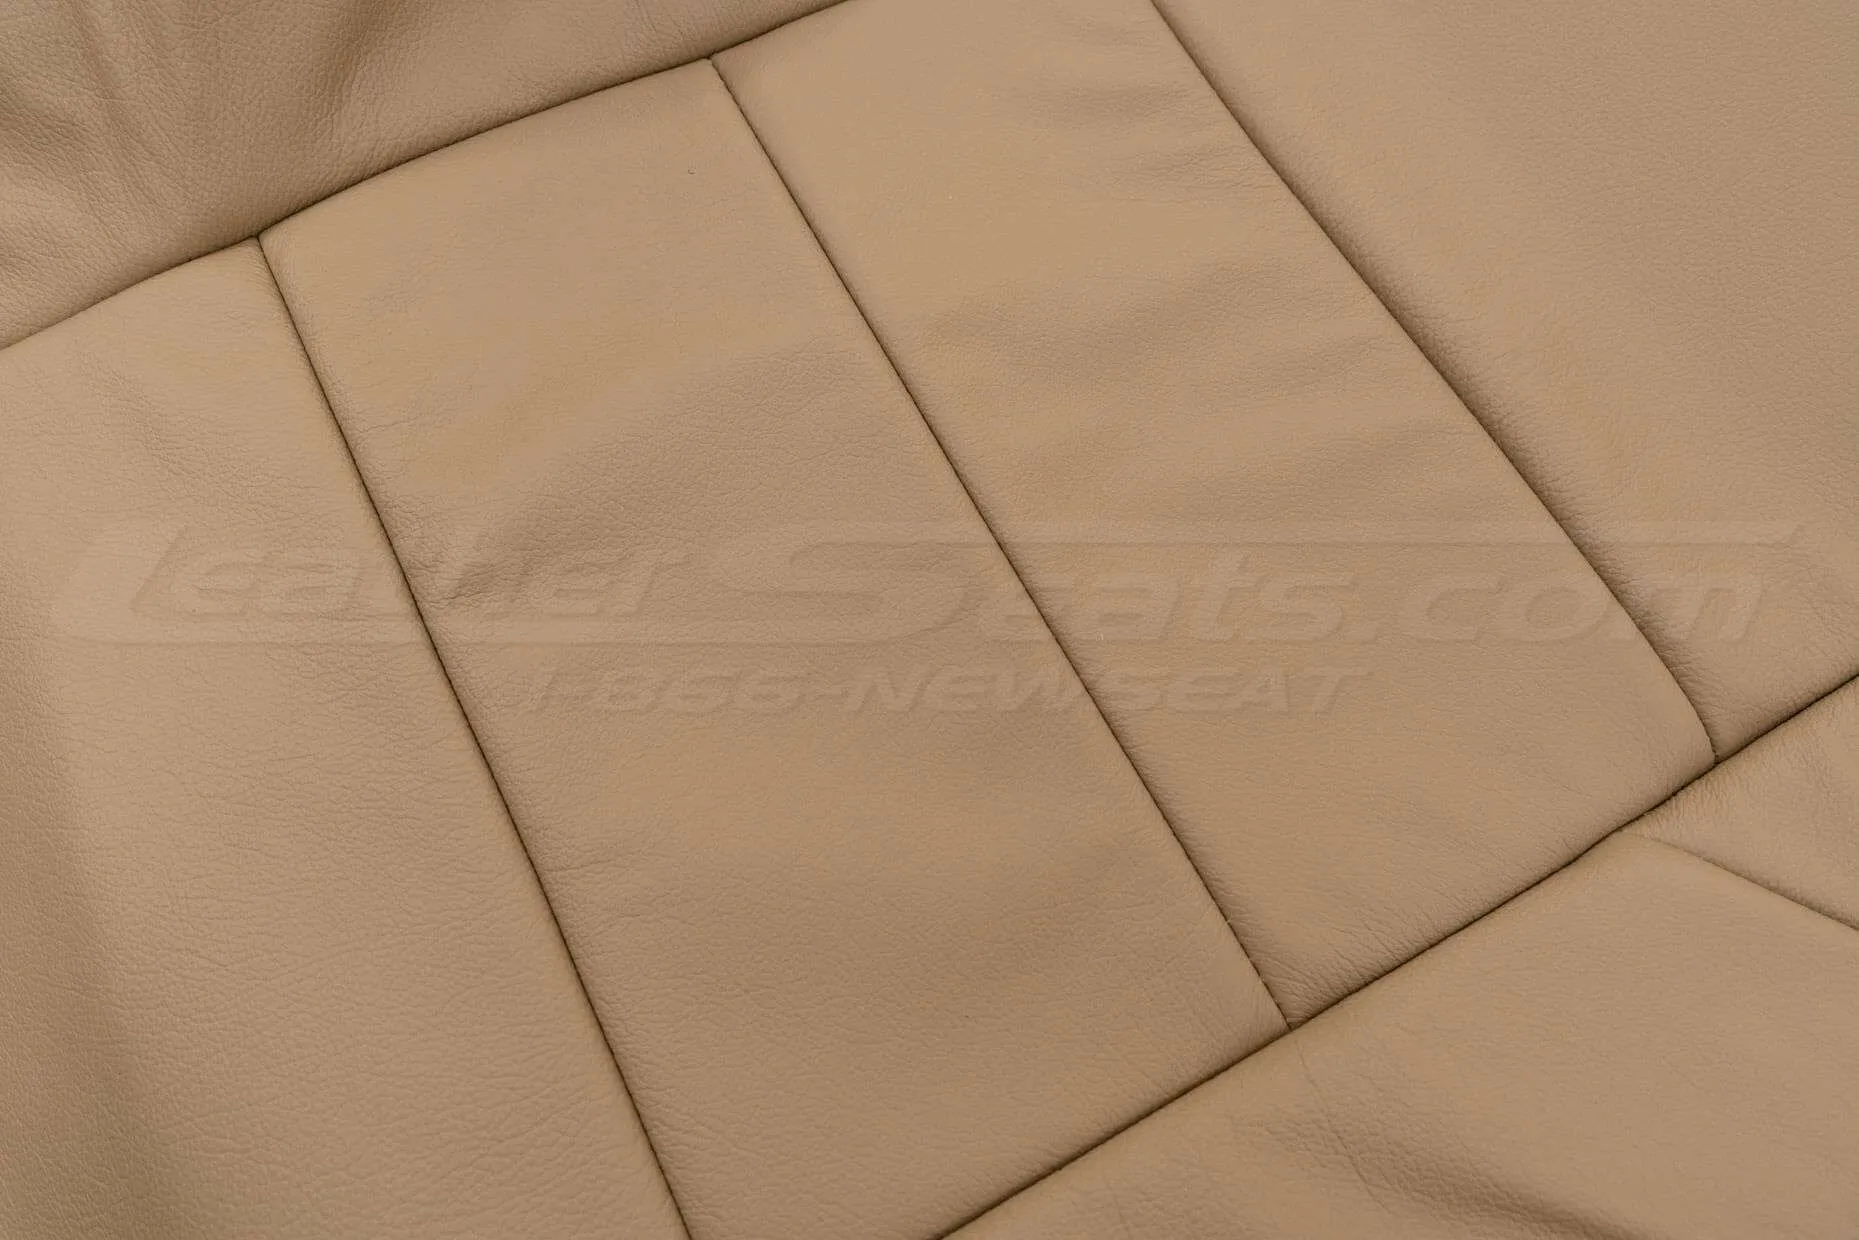 Bisque leather texture close-up